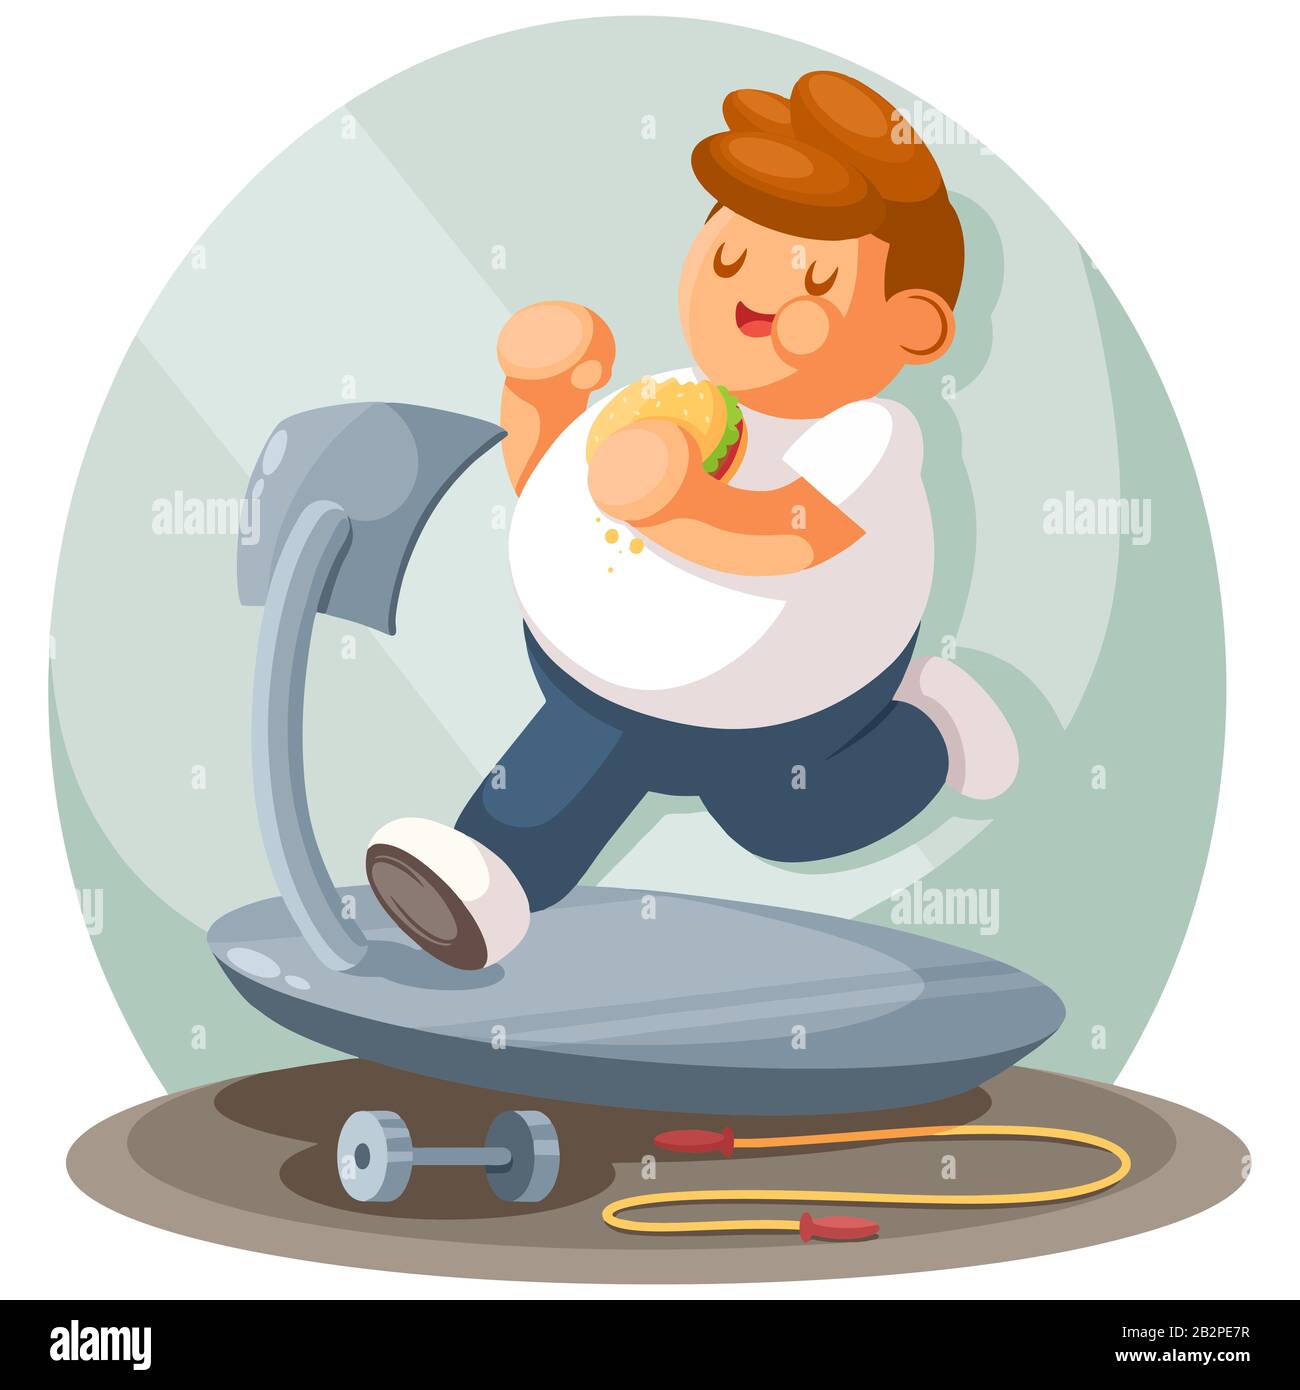 Fat boy jogging, flat cartoon illustration. Sports, active lifestyle, losing weight concept Stock Vector